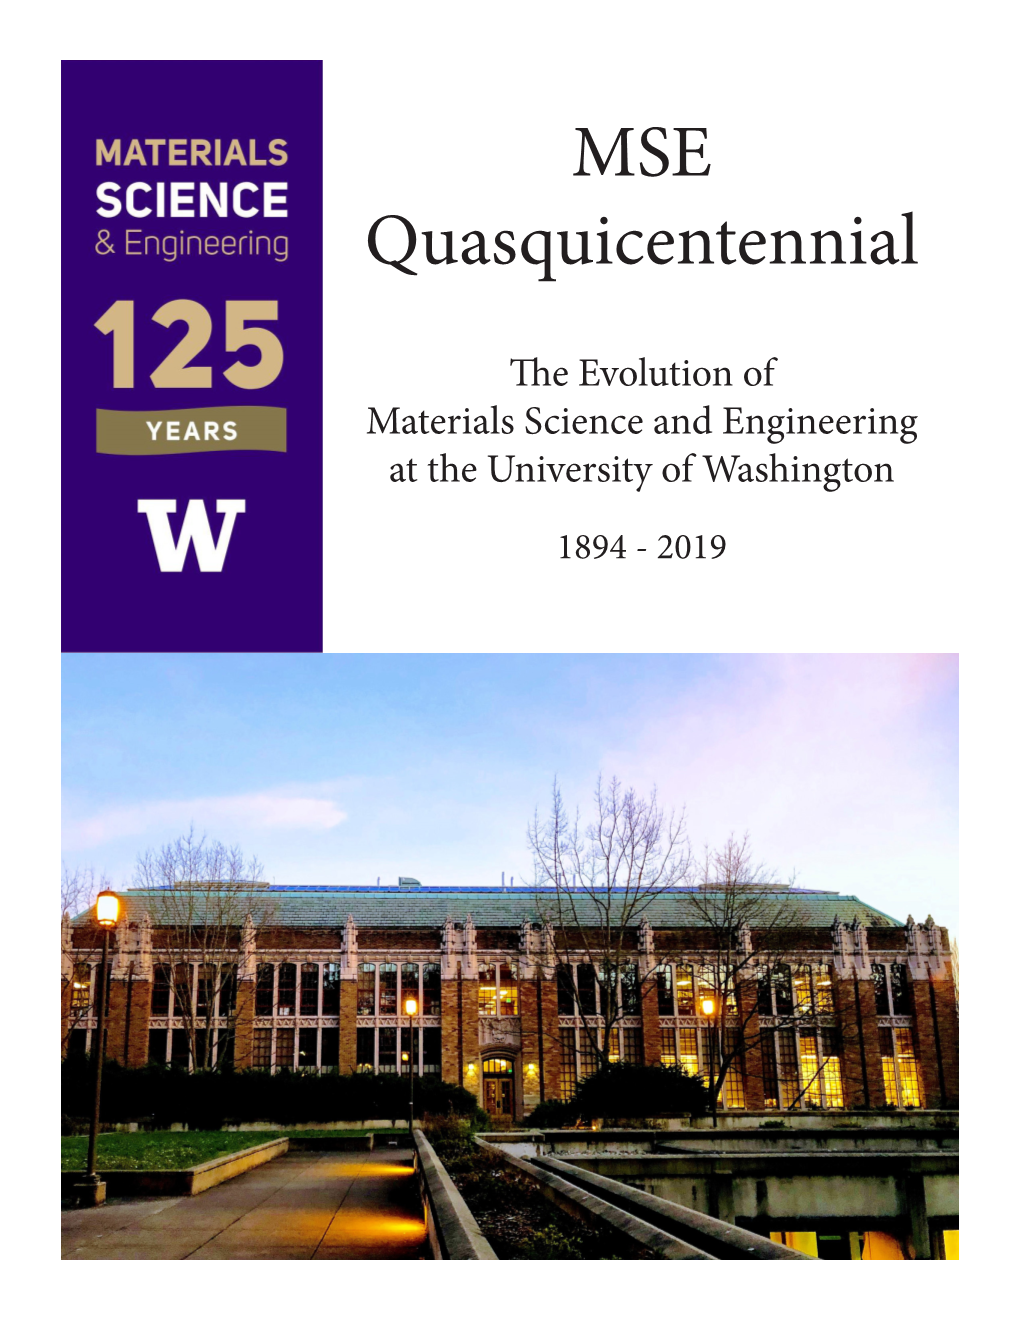 MSE Quasquicentennial: the Evolution of Materials Science and Engineering at The